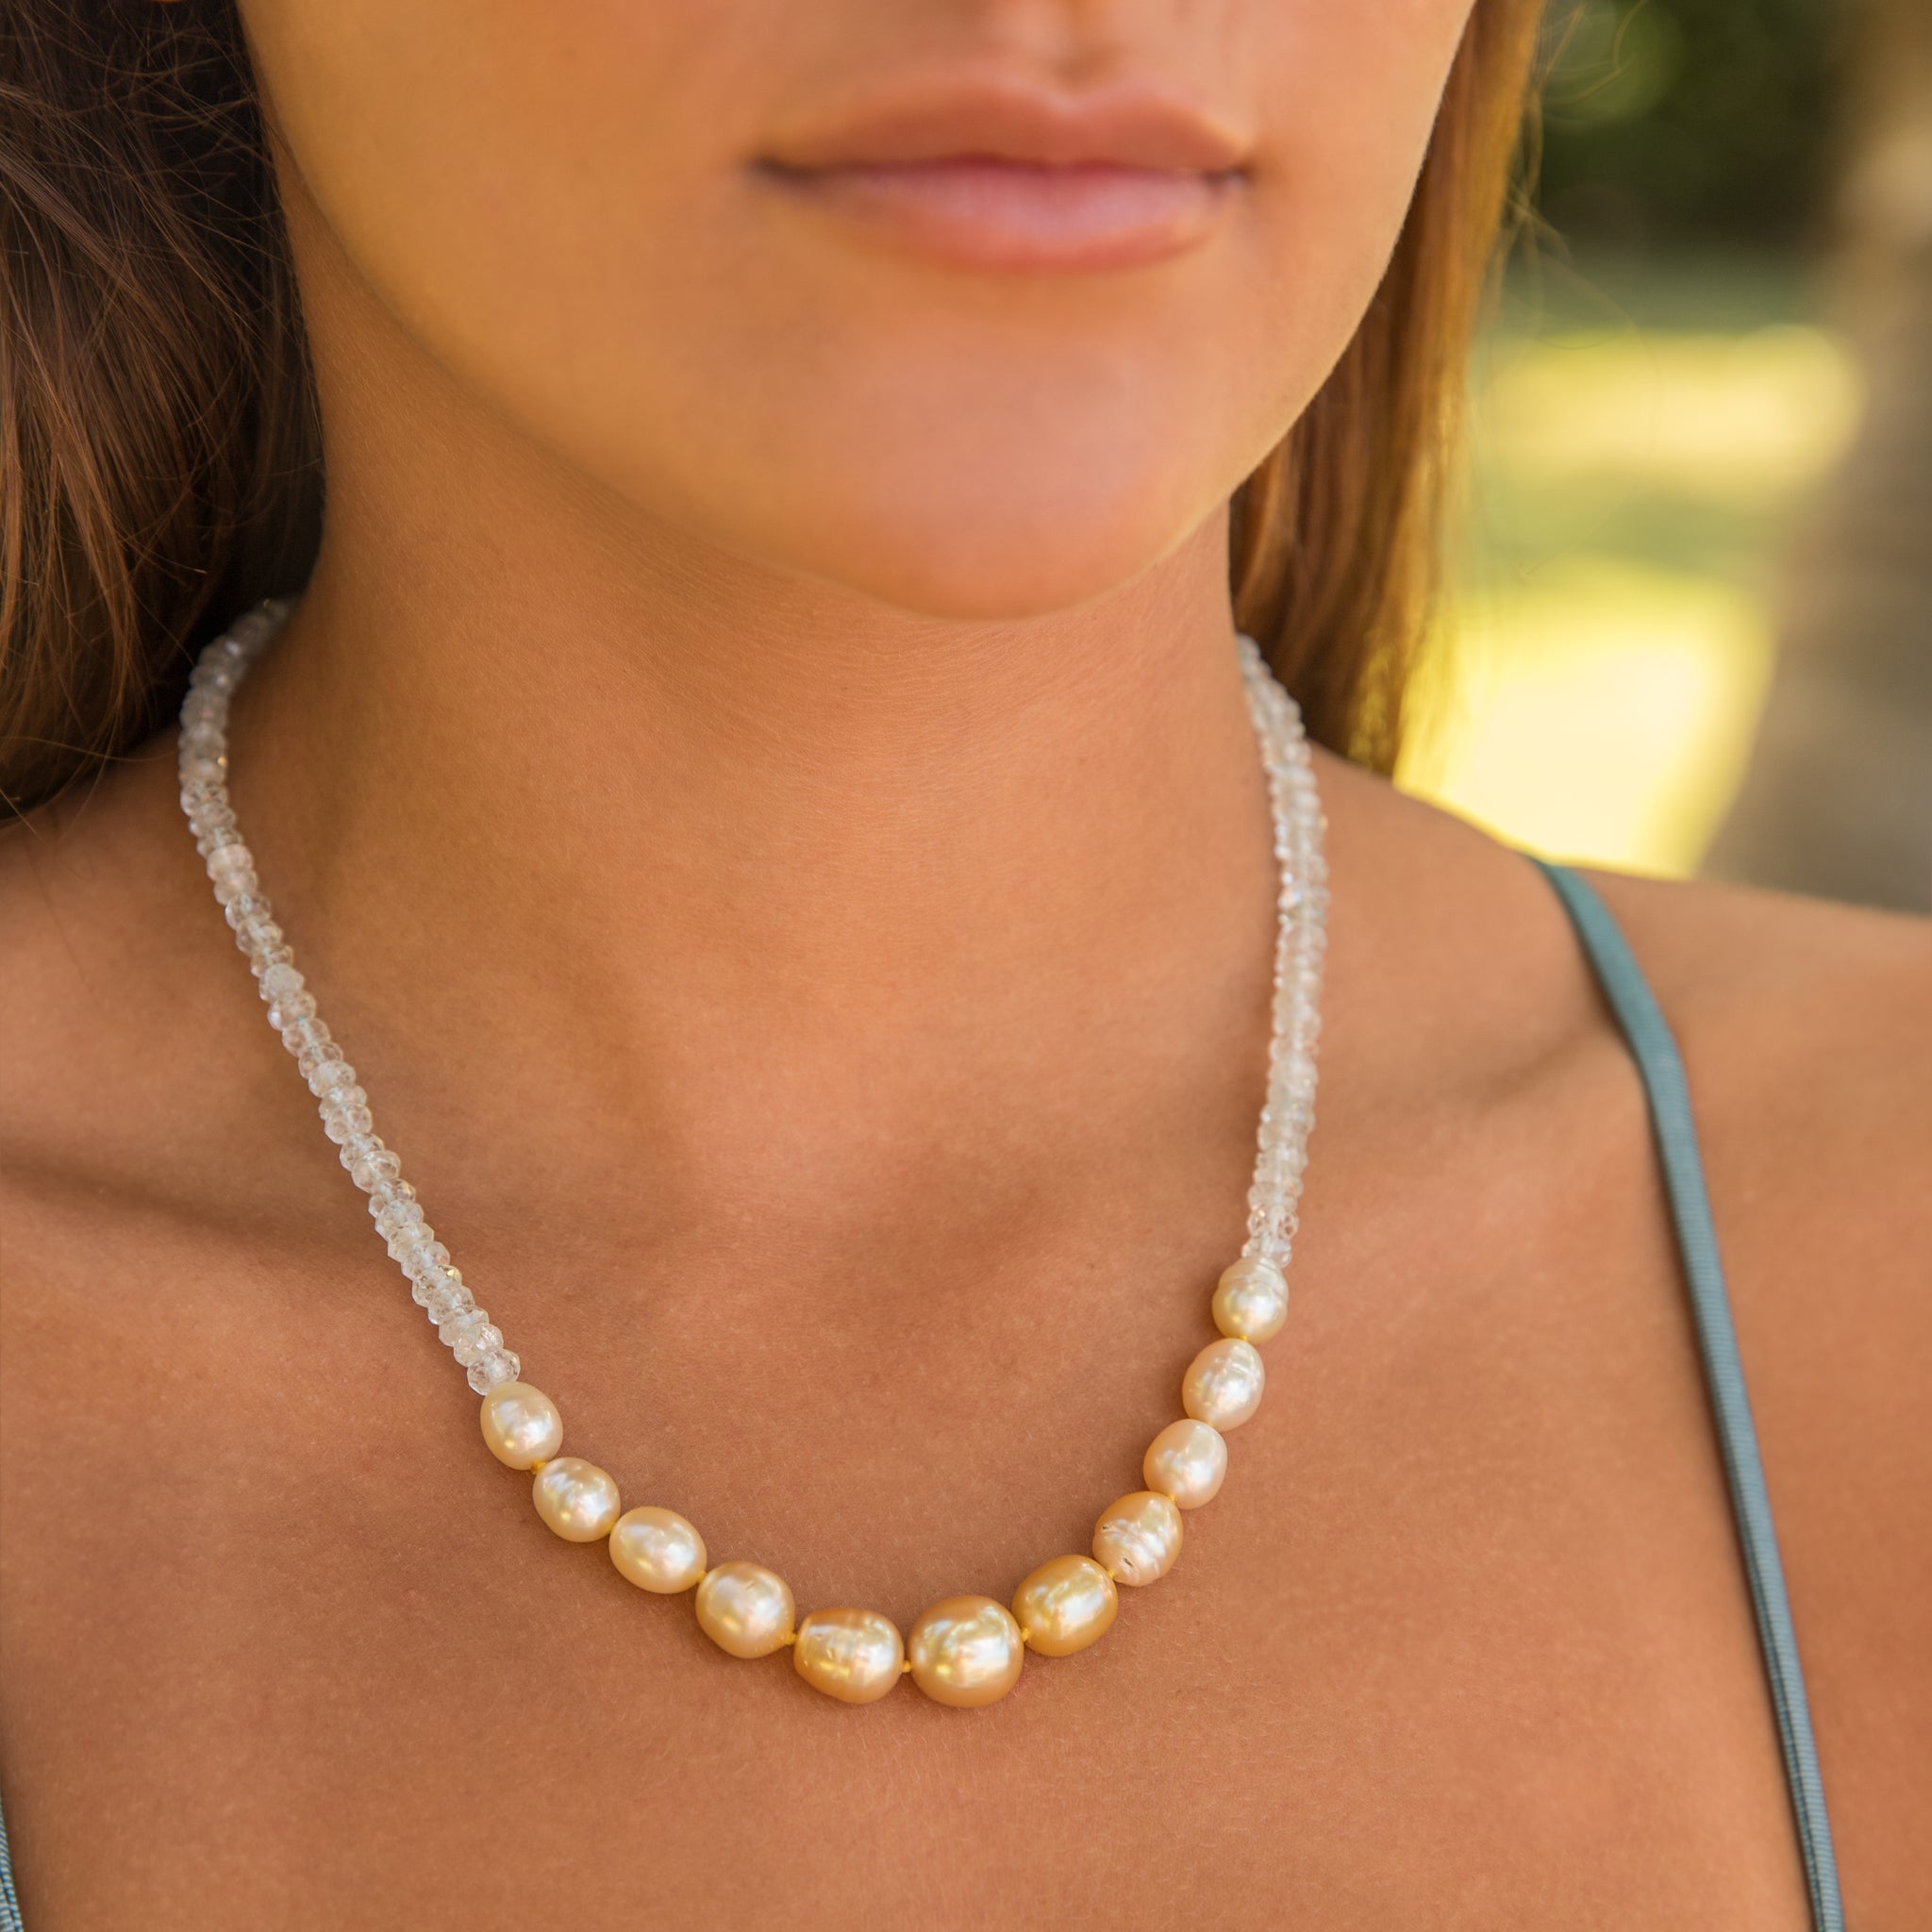 Golden South Sea Pearl Necklace - Brown Goldsmiths